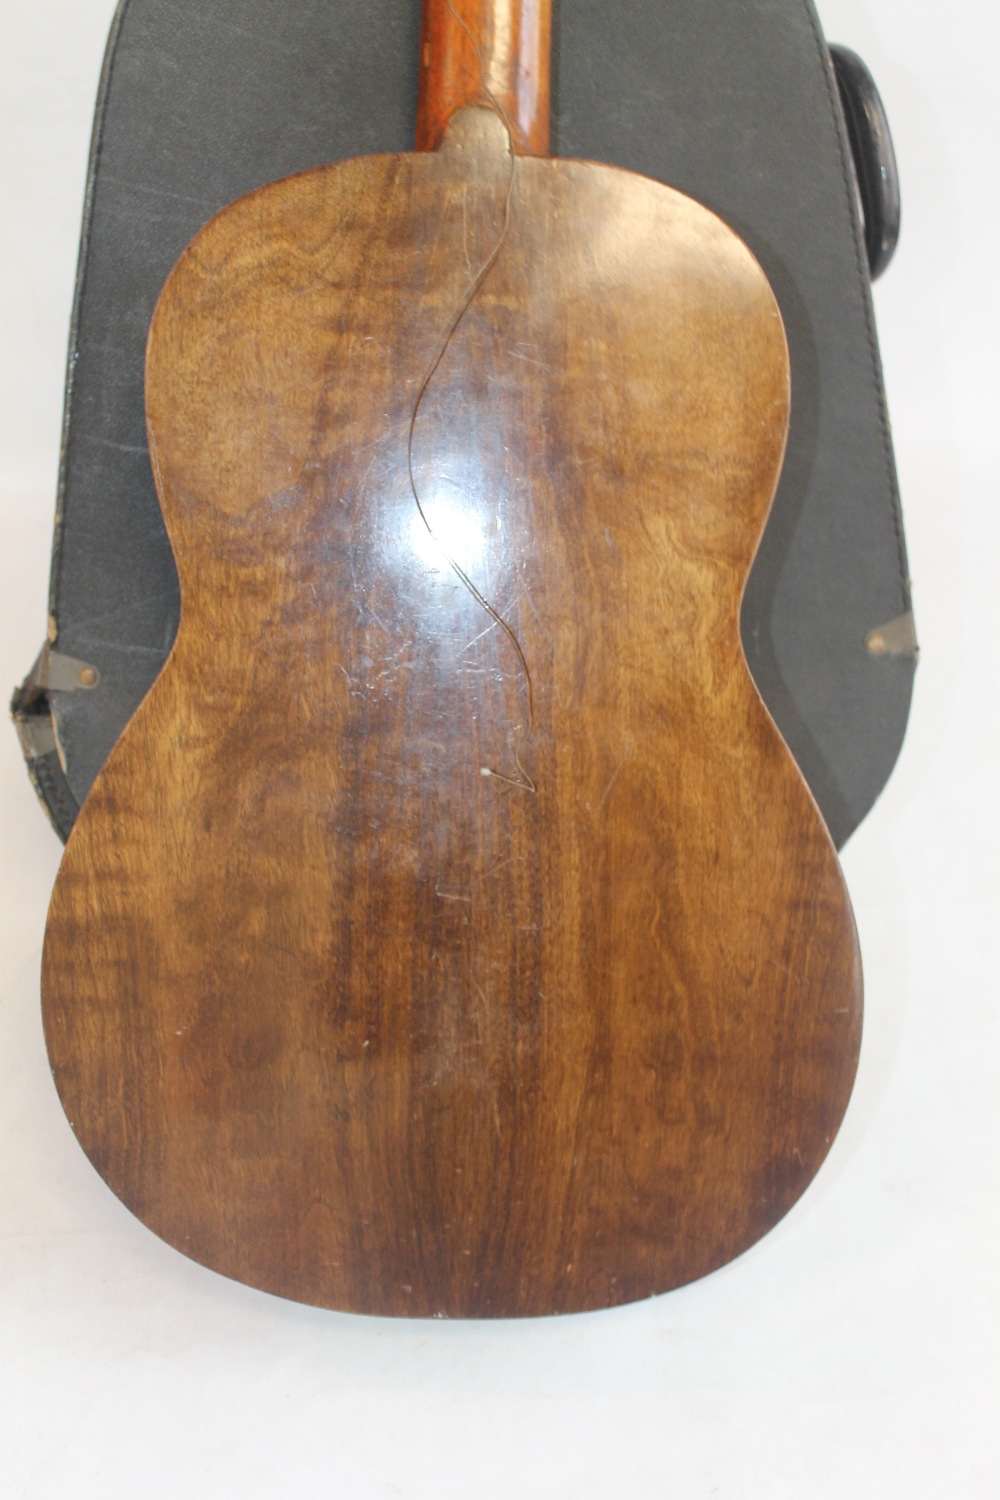 A VINTAGE SPANISH VINCENTE TATAY GUITAR IN CARRY CASE - Image 4 of 5